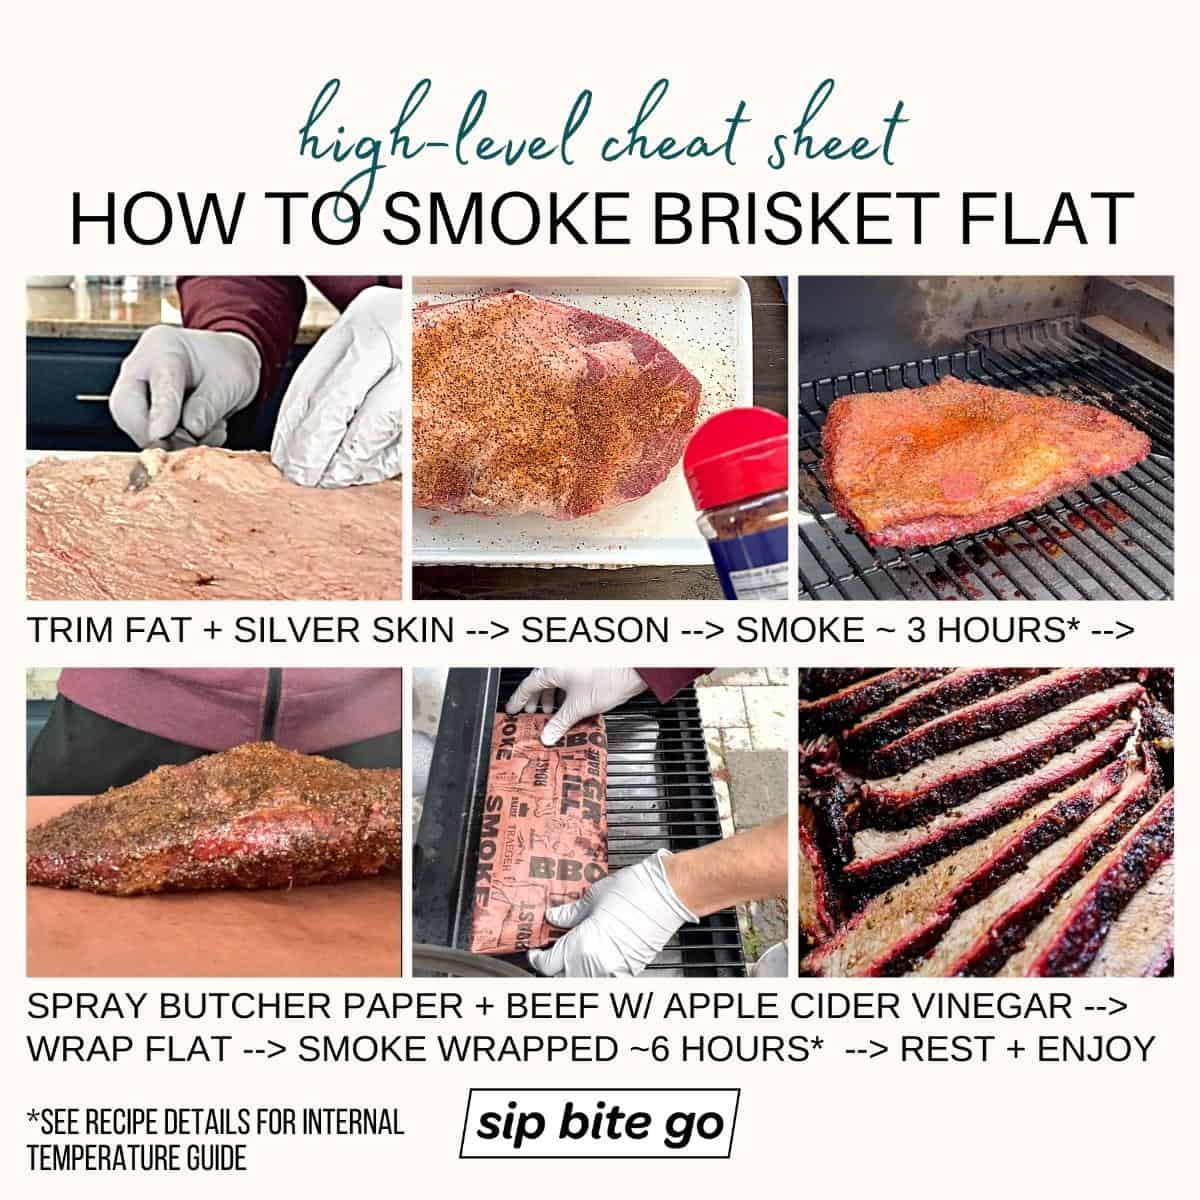 Infographic demonstrating smoking brisket flat on traeger pellet grill wrapped in butcher paper